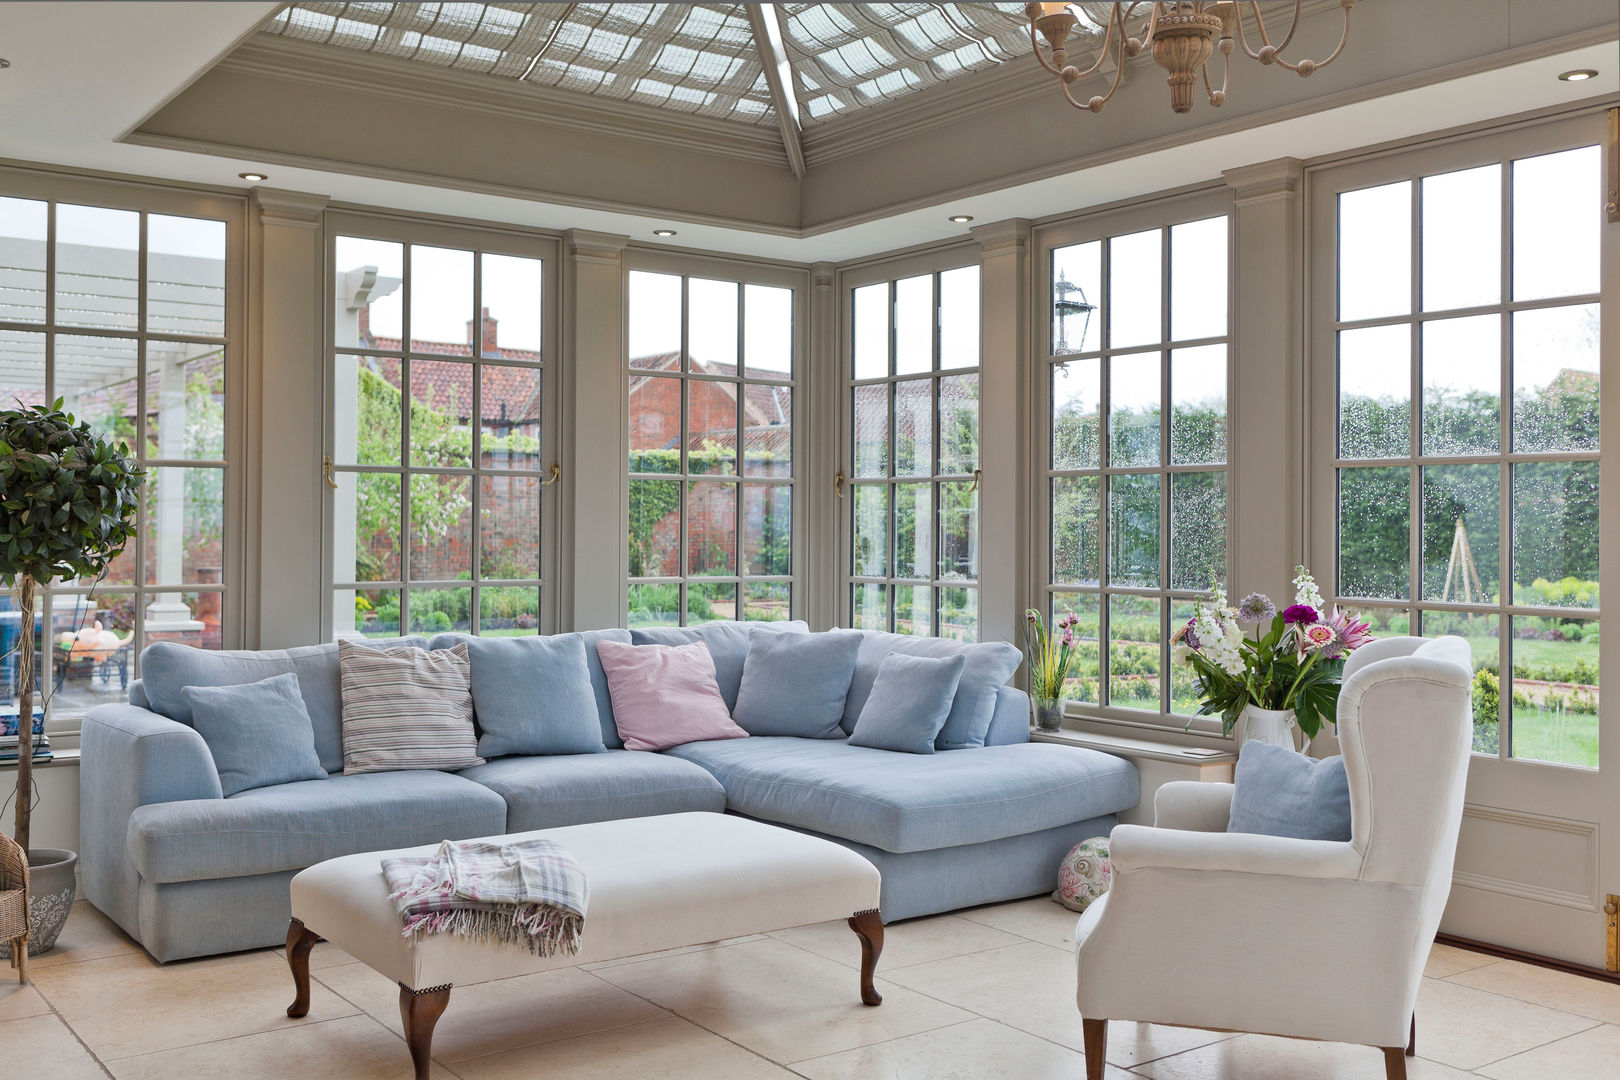 A Living Room Conservatory Vale Garden Houses Classic style conservatory Wood Wood effect